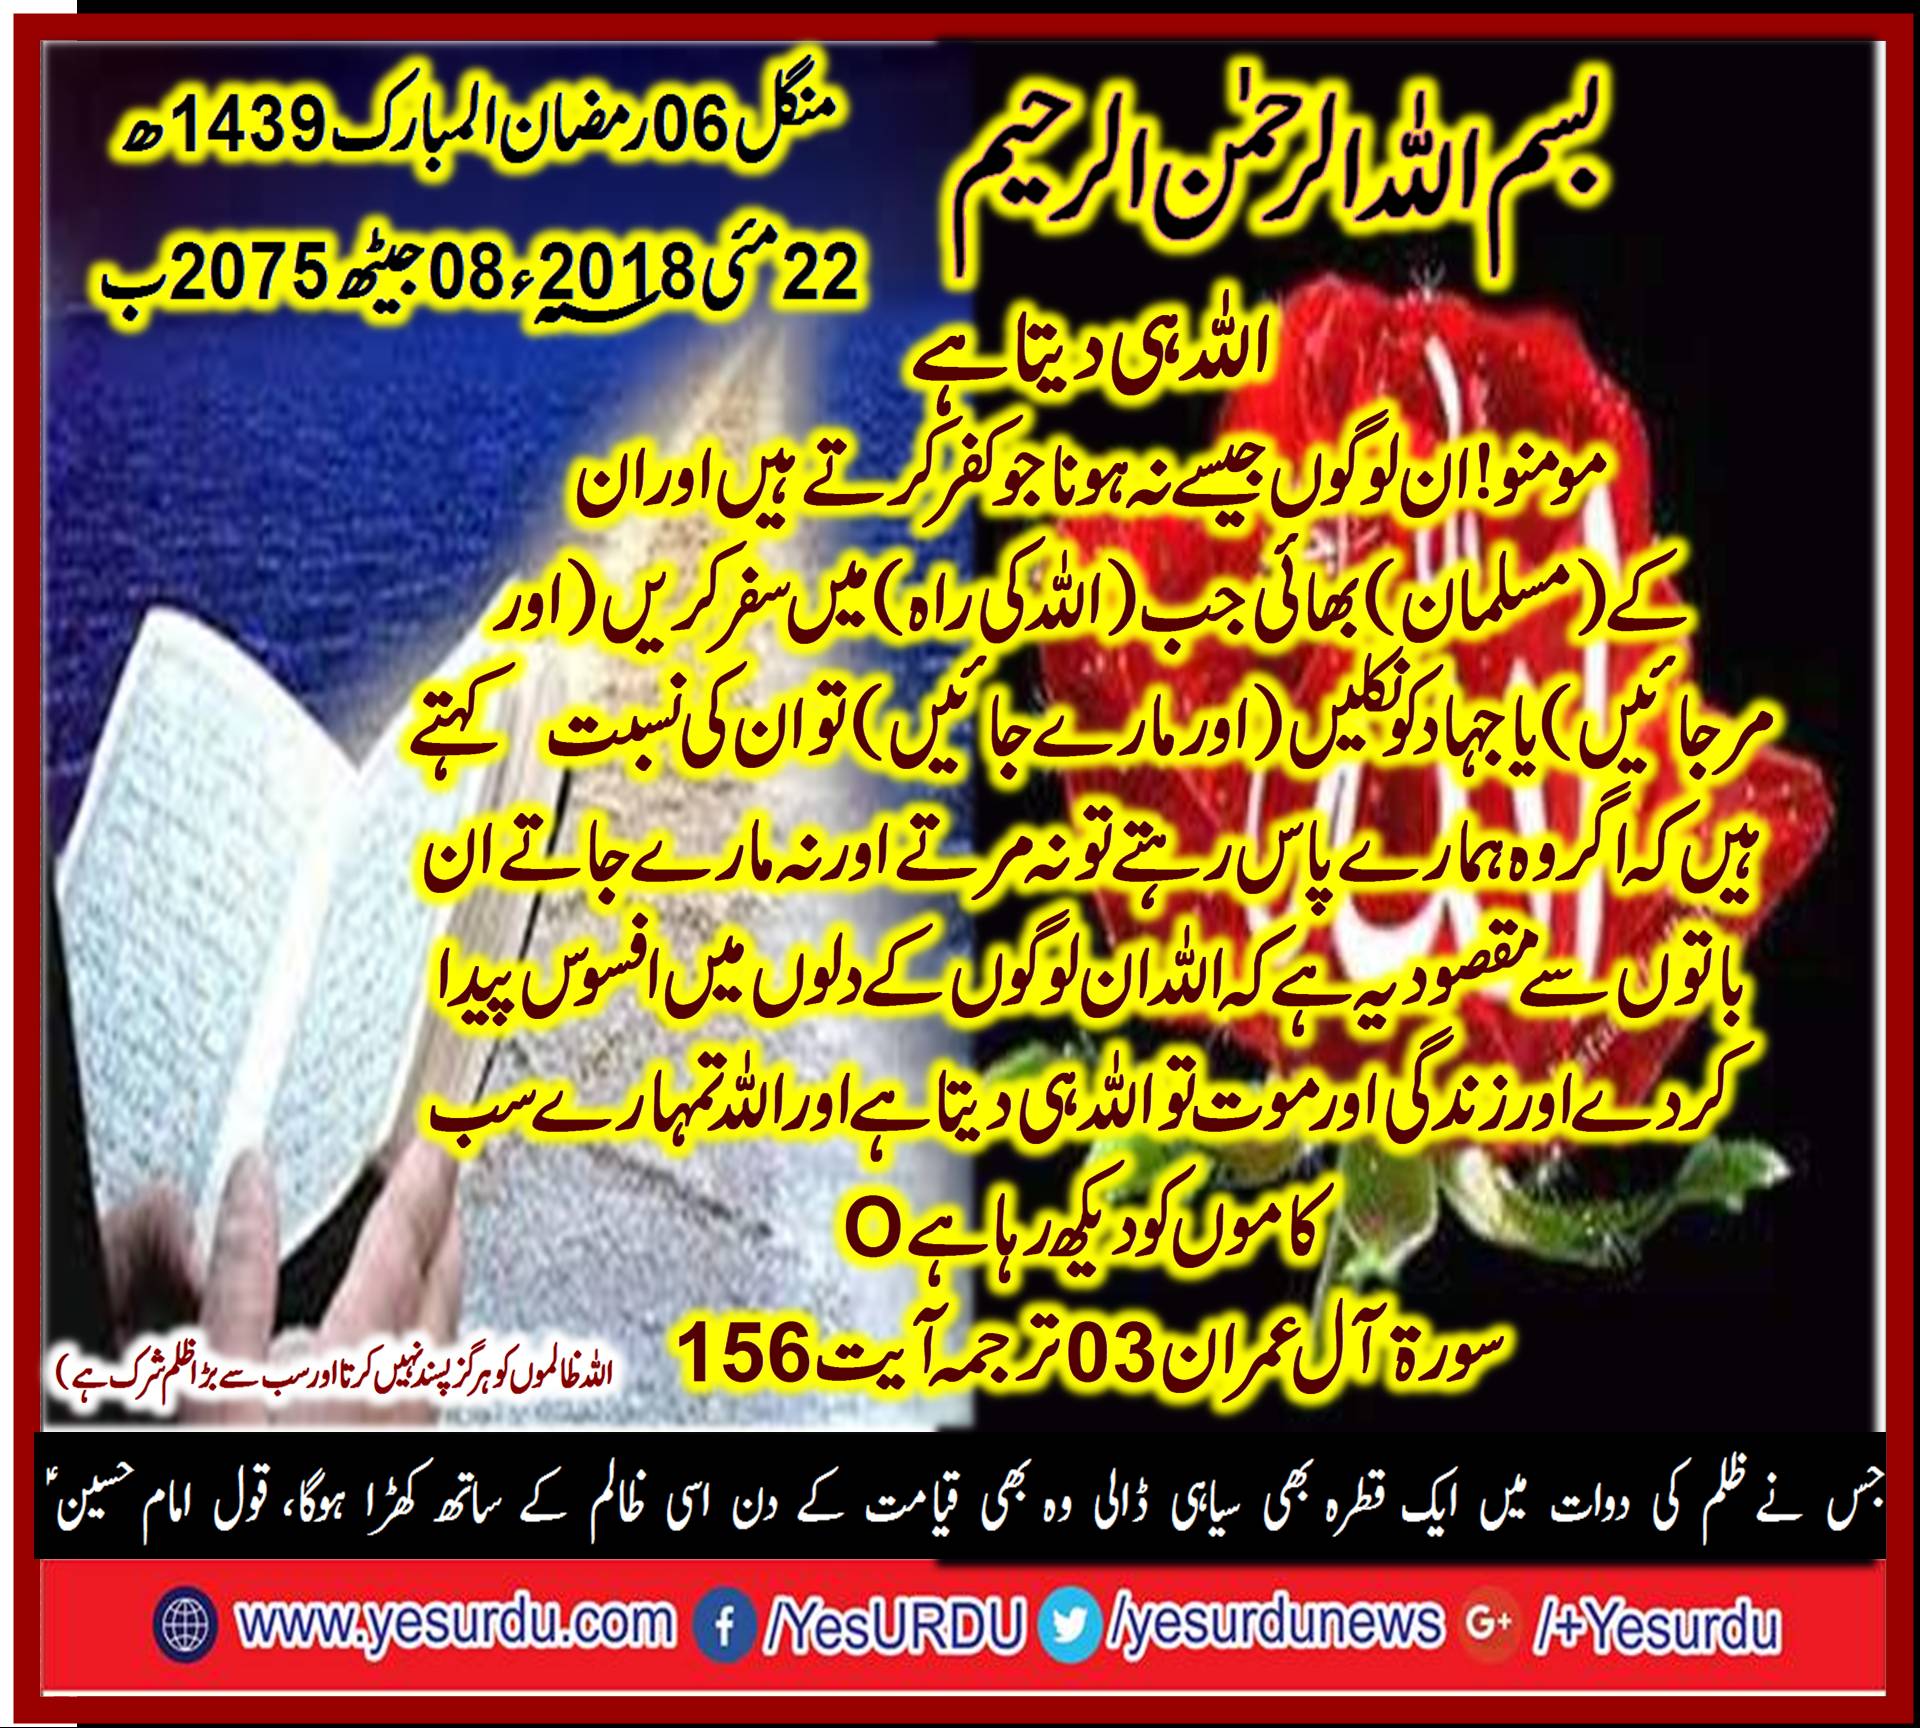 Ayat, e Kareema, Surah, Tehreem, Maryam bint e Imran، Surah Yunas, Allah, ka Fazal, Surah Mulk, 67, Ayat, No. 3, to, 4, Allah's, creature, Surah, Aal e Imran, Ayat, No, 103, Allah, gives, love, to, hearts, Surah Aal e Imran, Ayat, No 154, Allah's, will, and, your, end, of, time, takes, you, to, the, place, of, your, end, Ayat, No 155, in, the, War of Ohad, Shatan, disappointed, companions, of, Hazrat, Muhammad, S.A.W, Ayat No 156, when, you, left, your,house, for, jihad, Allah, keeps, you, under, the, shelter